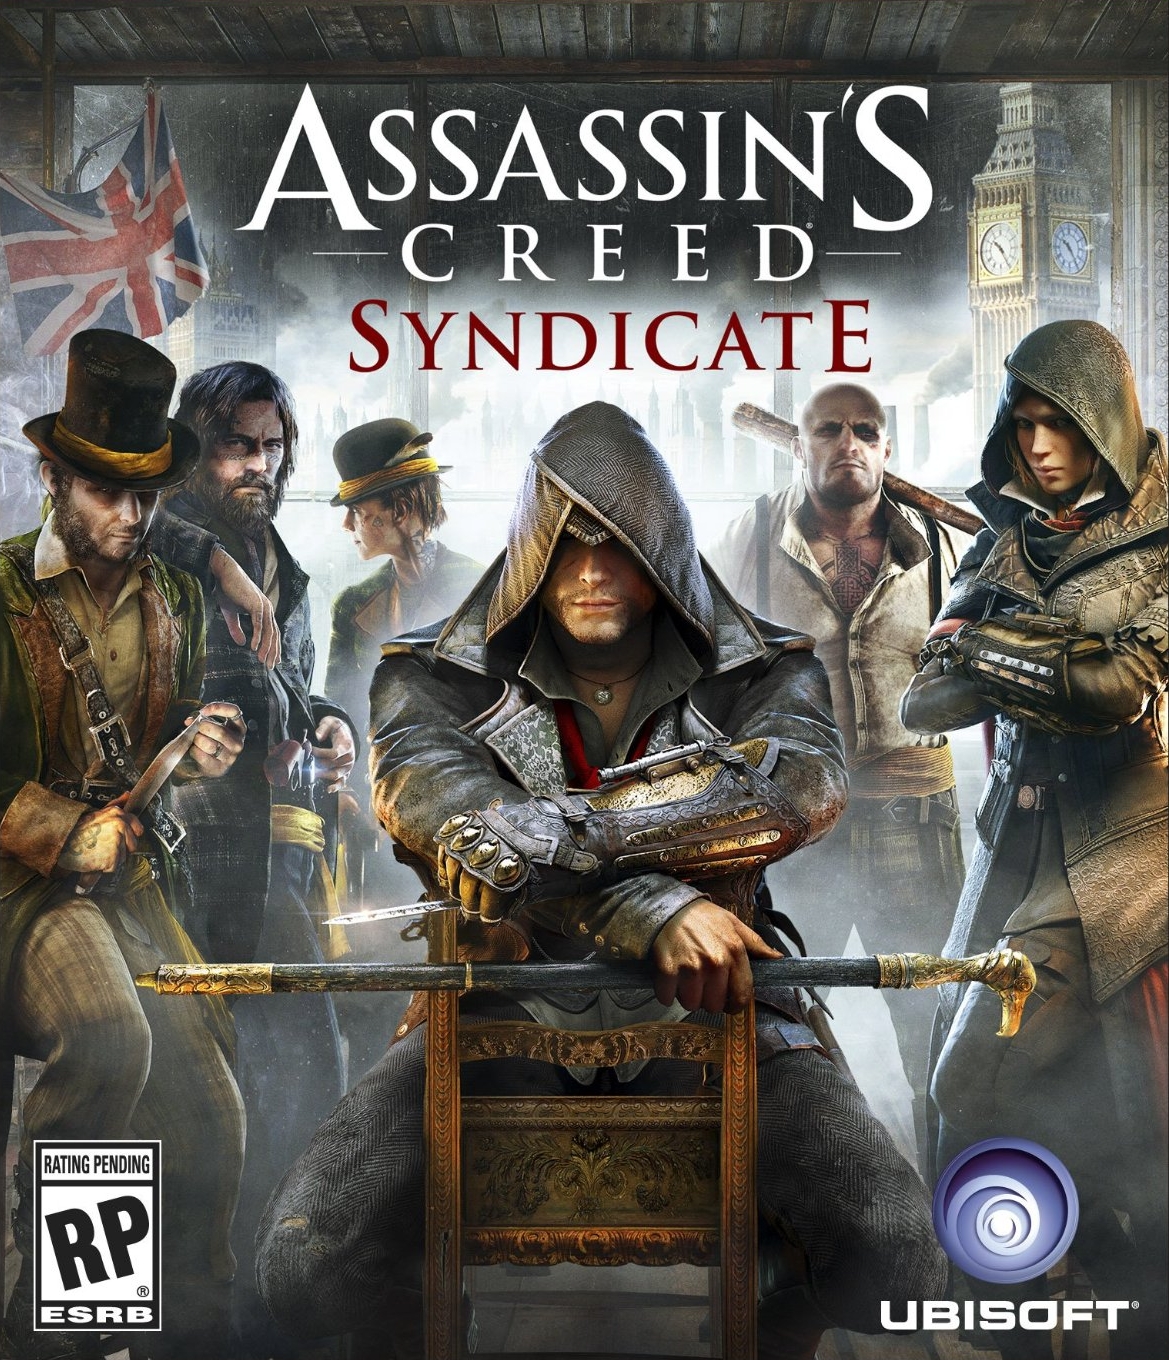 Steep Ultimate Seraph Assassin's Creed Syndicate Pre-Order Bonuses (Special Editions &  Differences)